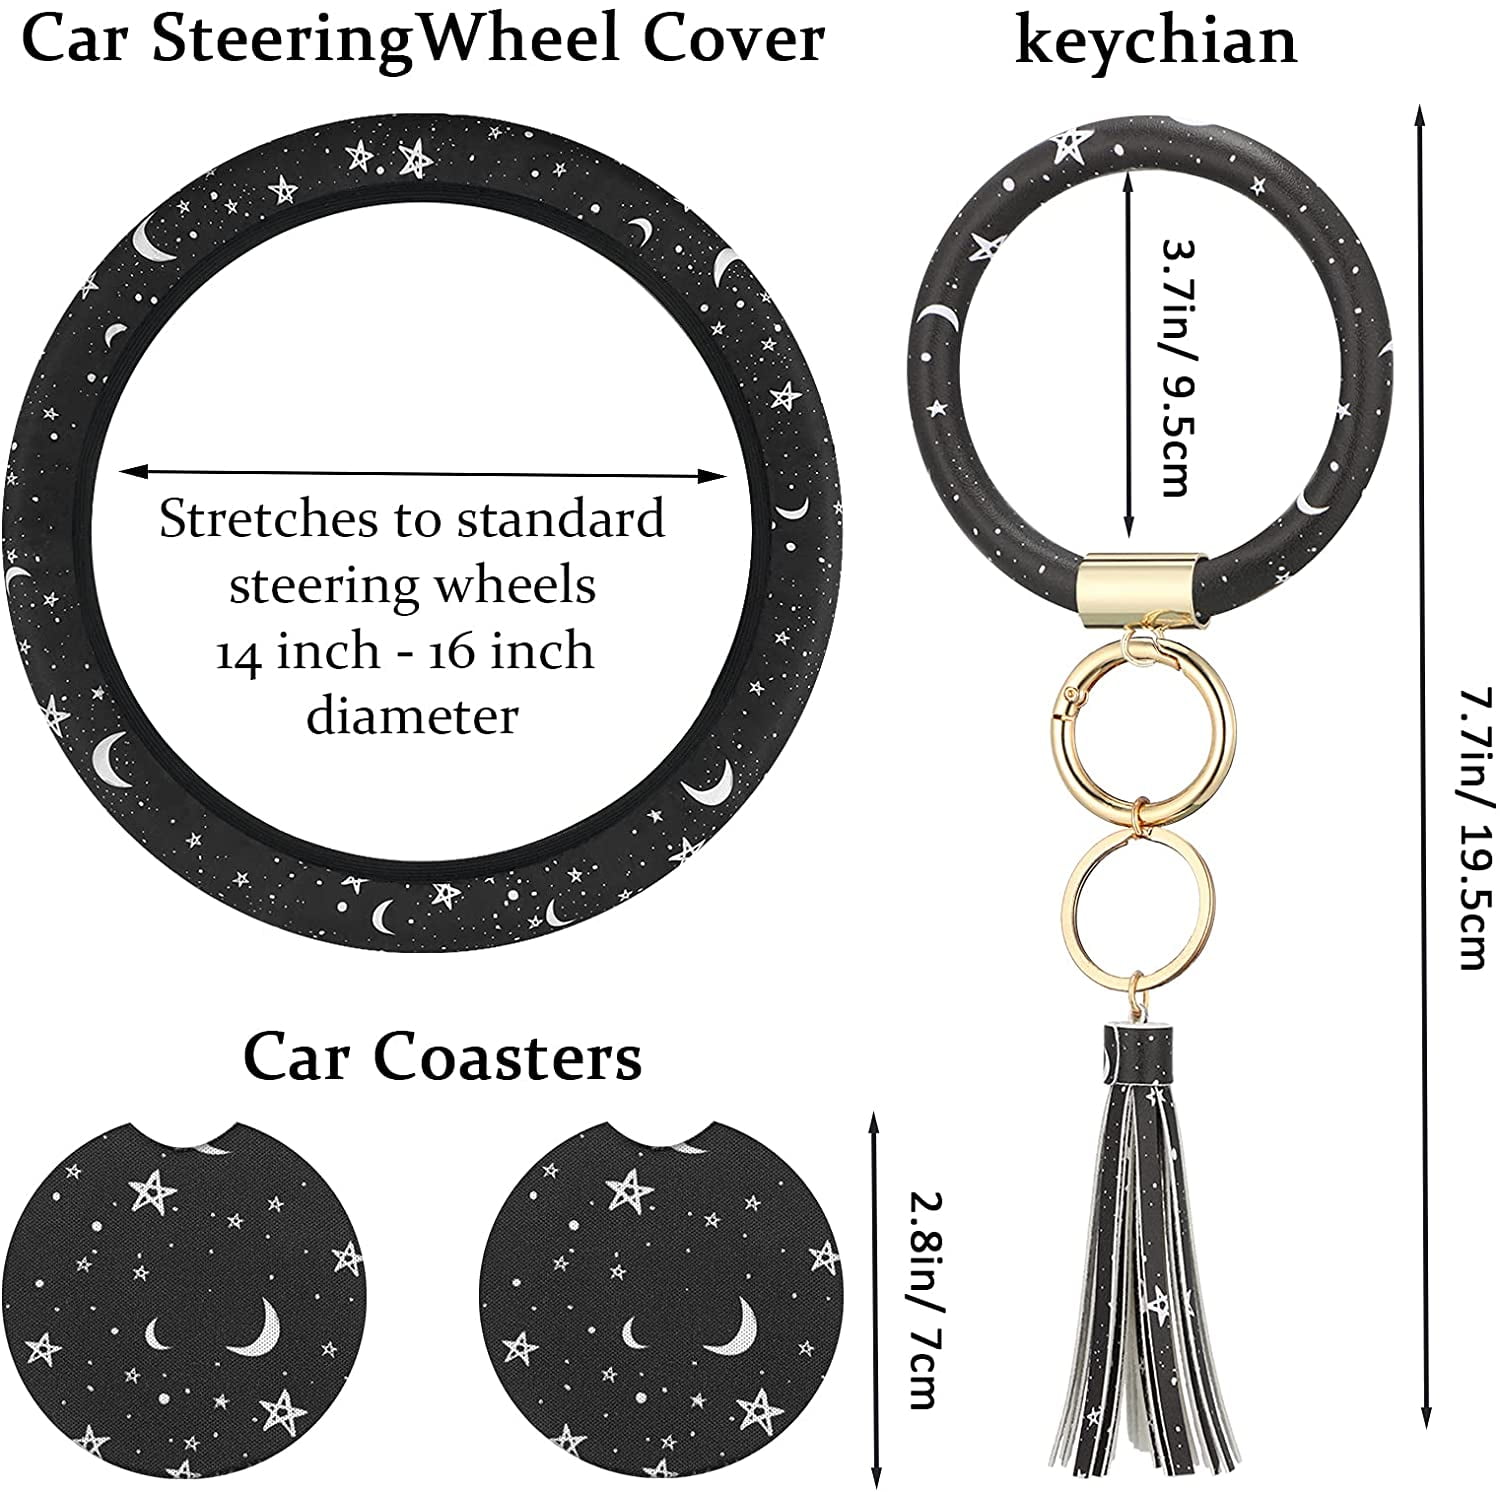 4 Pieces Black Moons White Stars Print Car Accessories Set Black Moons White Stars Steering Wheel Cover with 2 Pieces Car Coasters and Leather Keyring for Car Truck SUV